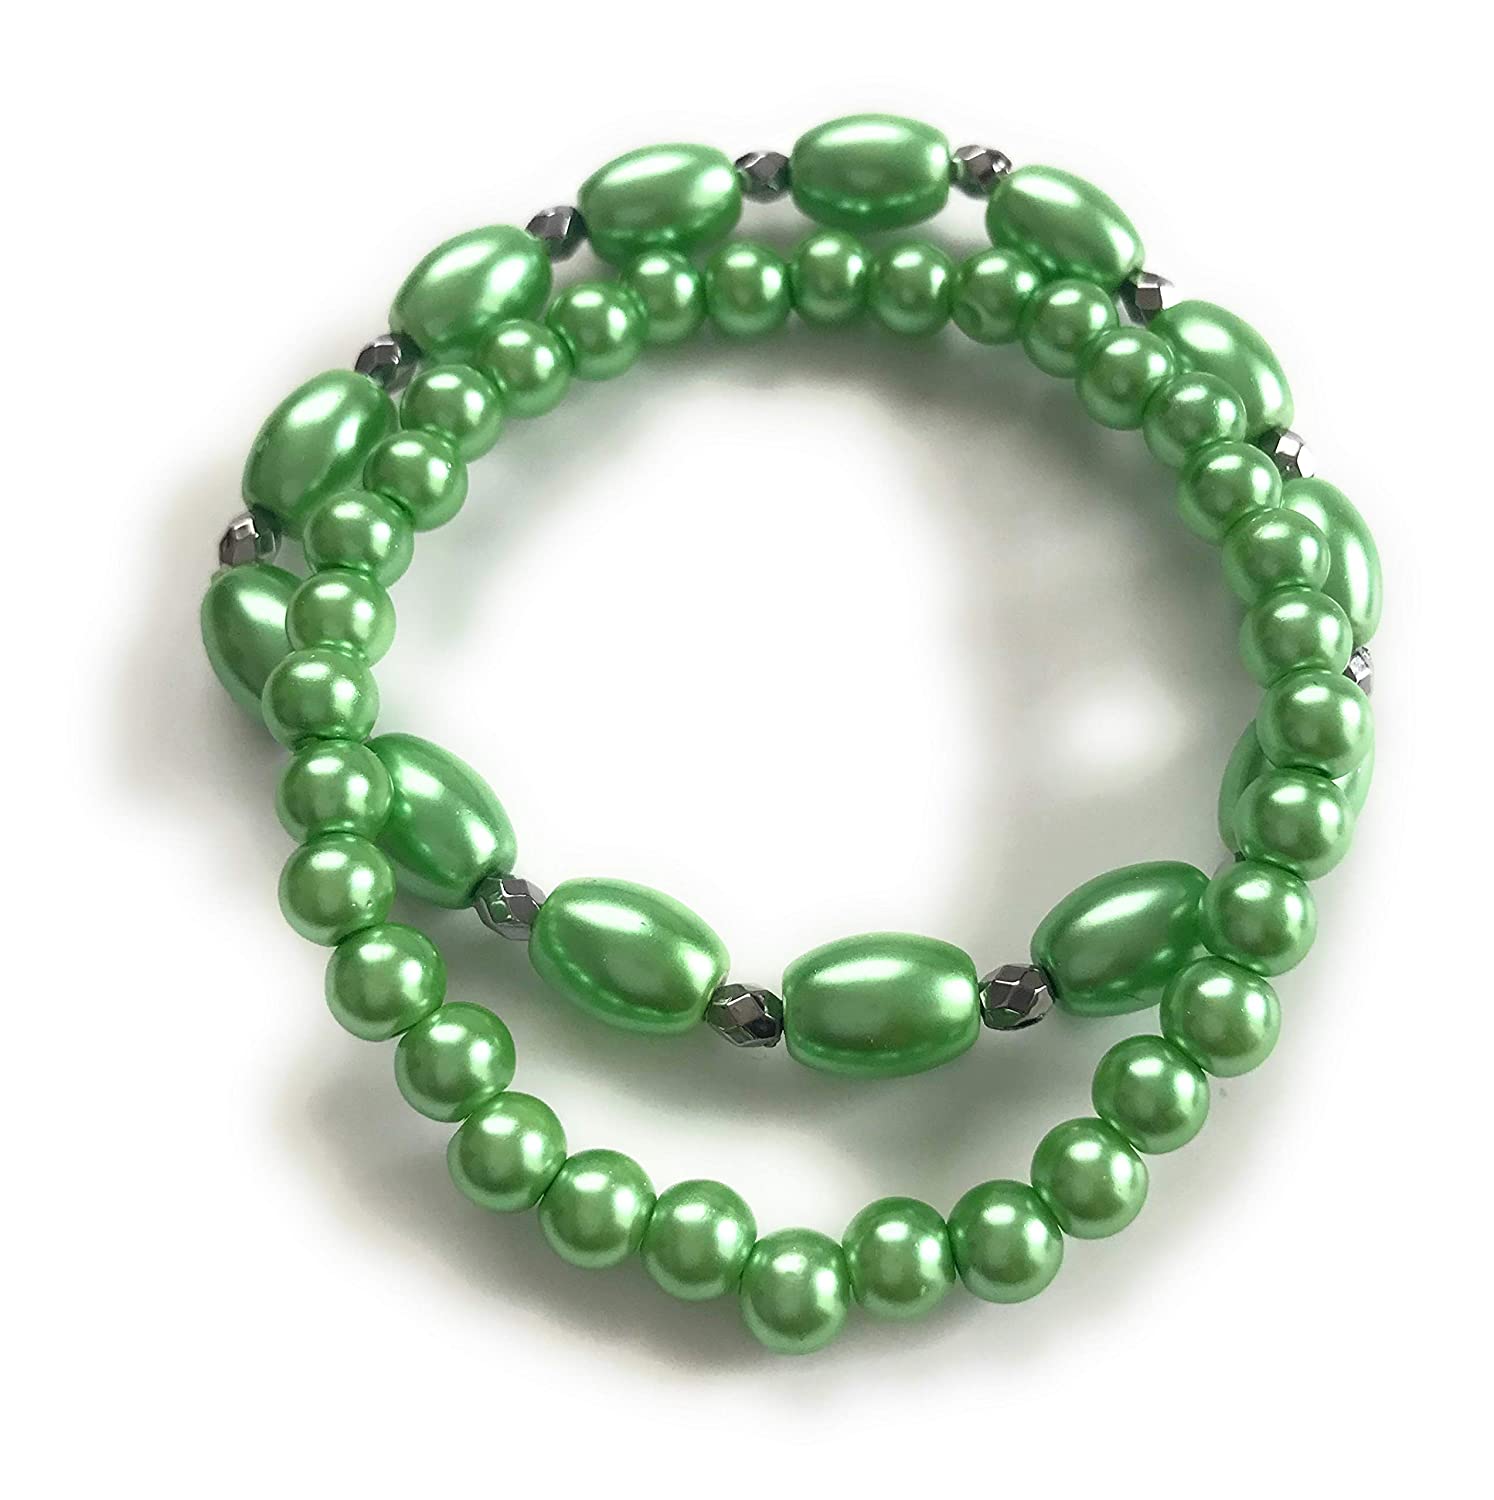 Set of 2 Green Faux Pearl Beaded Stretch Bracelet Top View from Scott D Jewelry Designs